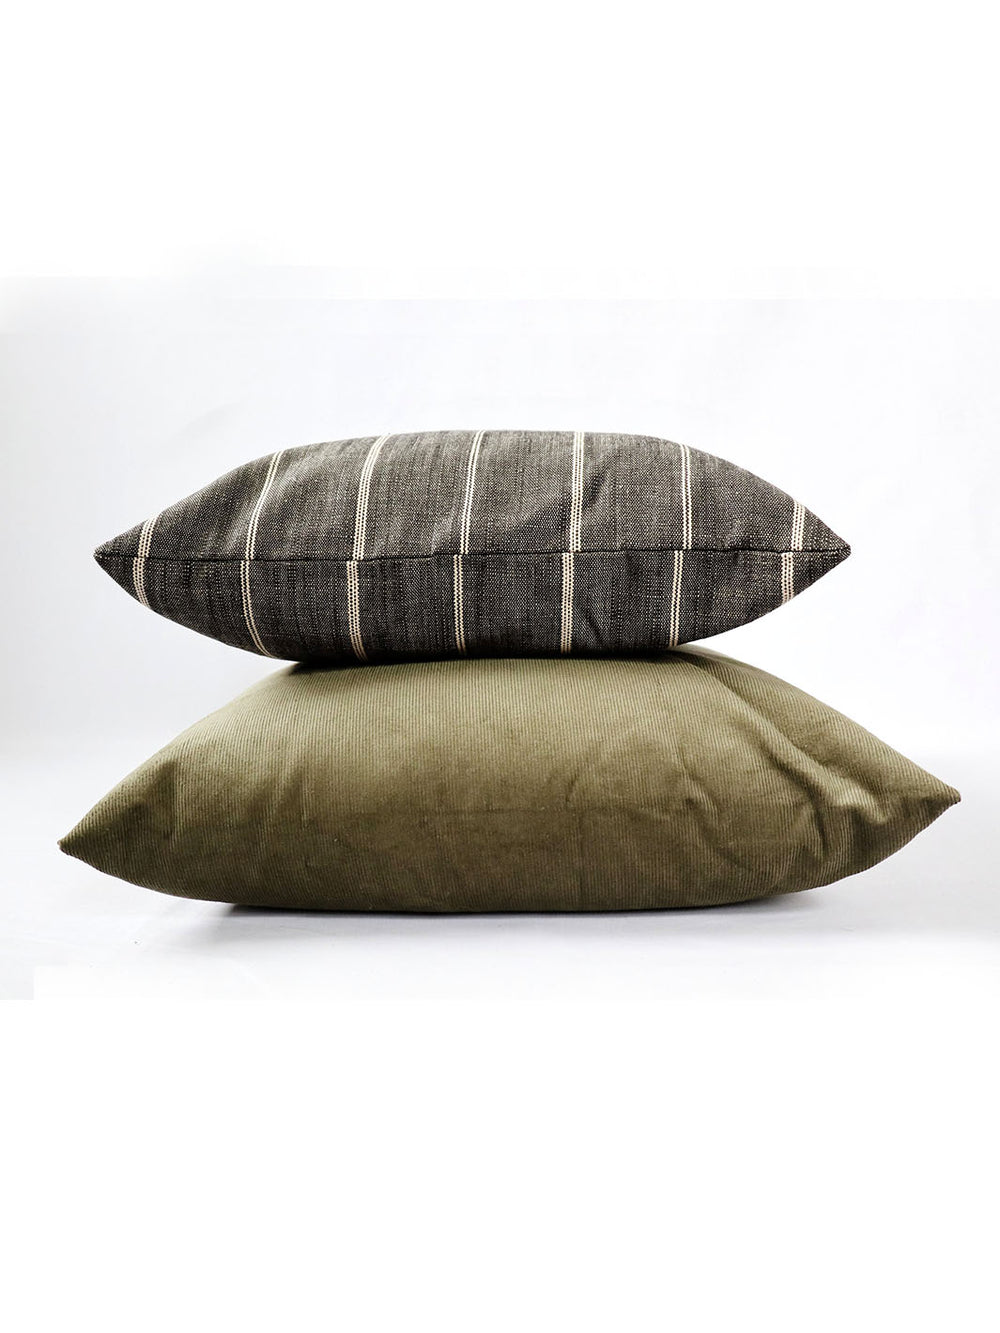 Olive Corduroy Pillow Cover 20" Earthly Comfort Home Decor 739-1